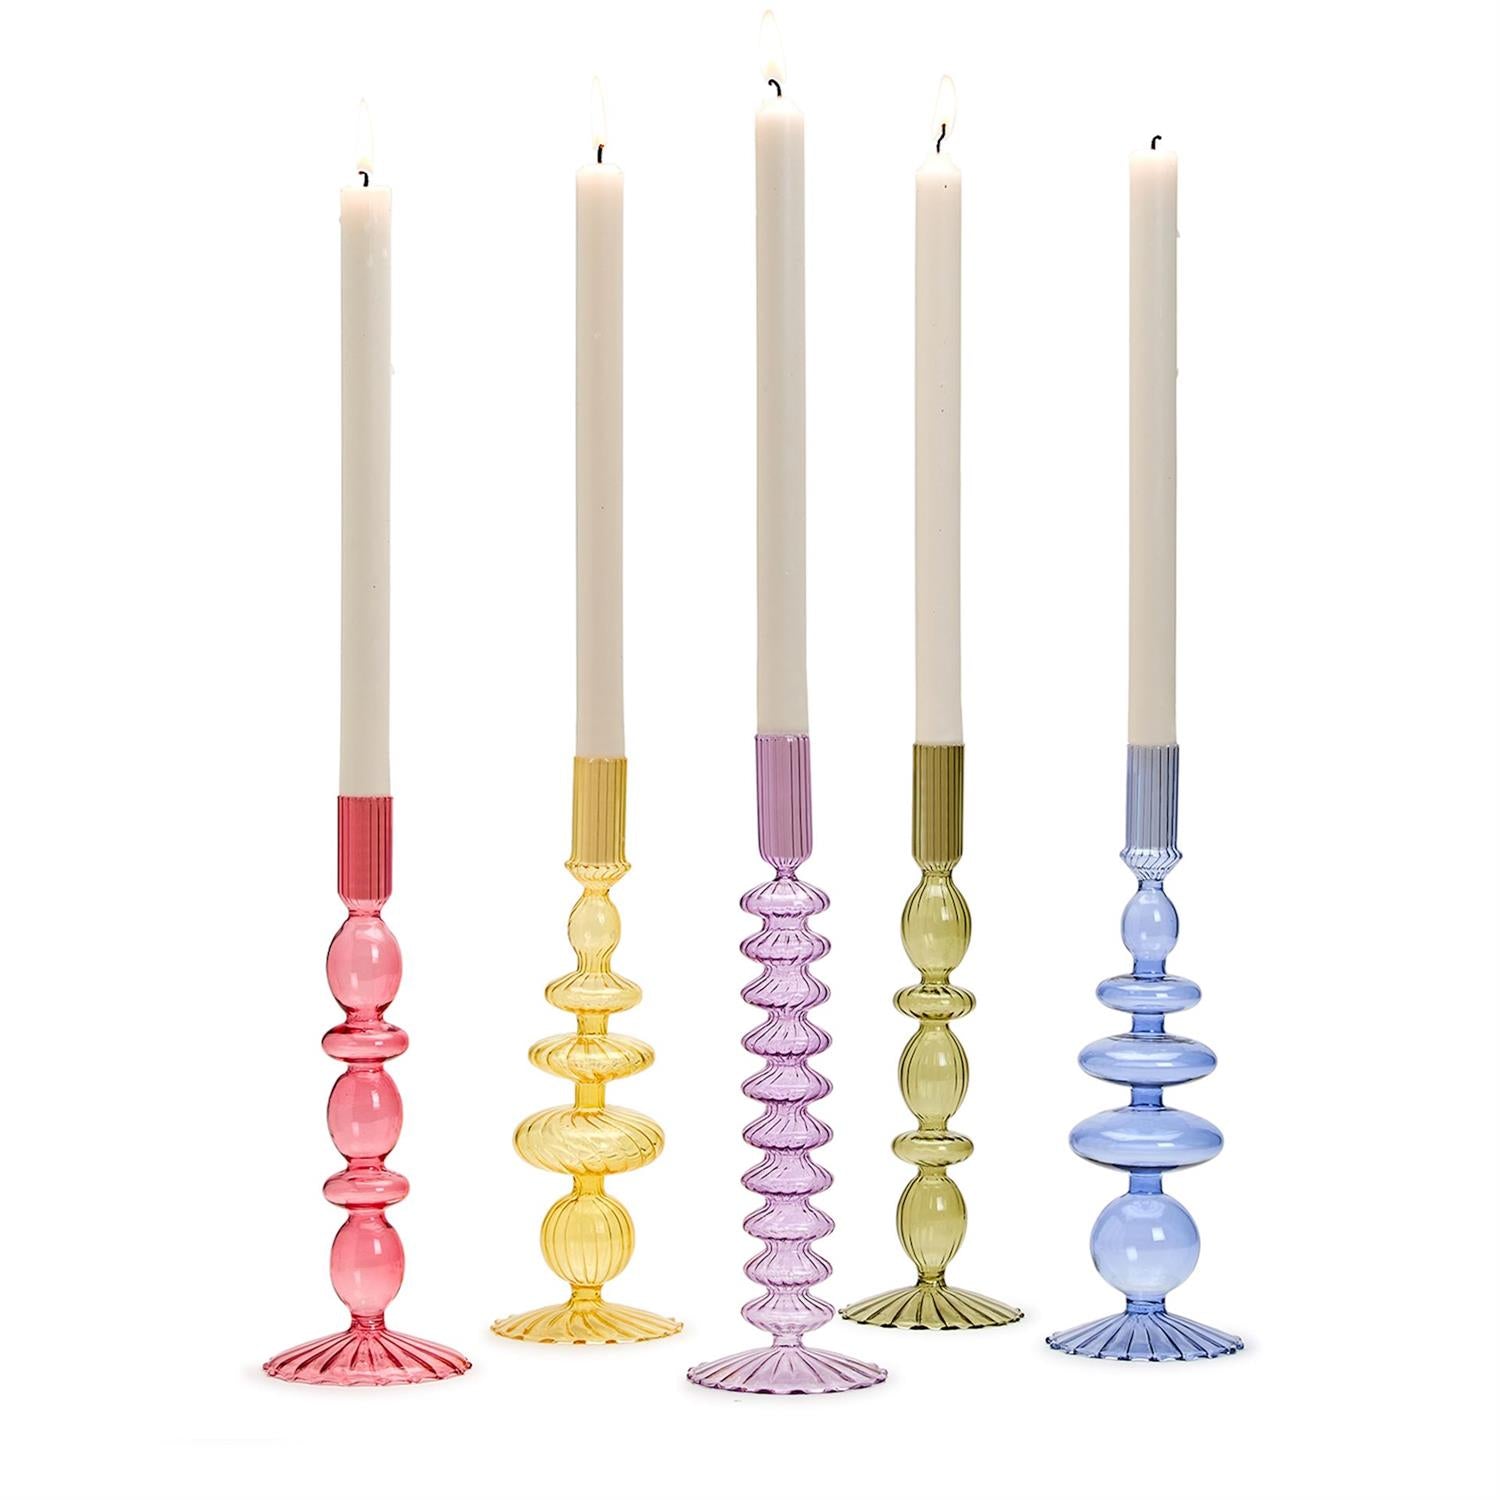 S/5 Hand-Blown Glass Candleholder Incl 5 Colors